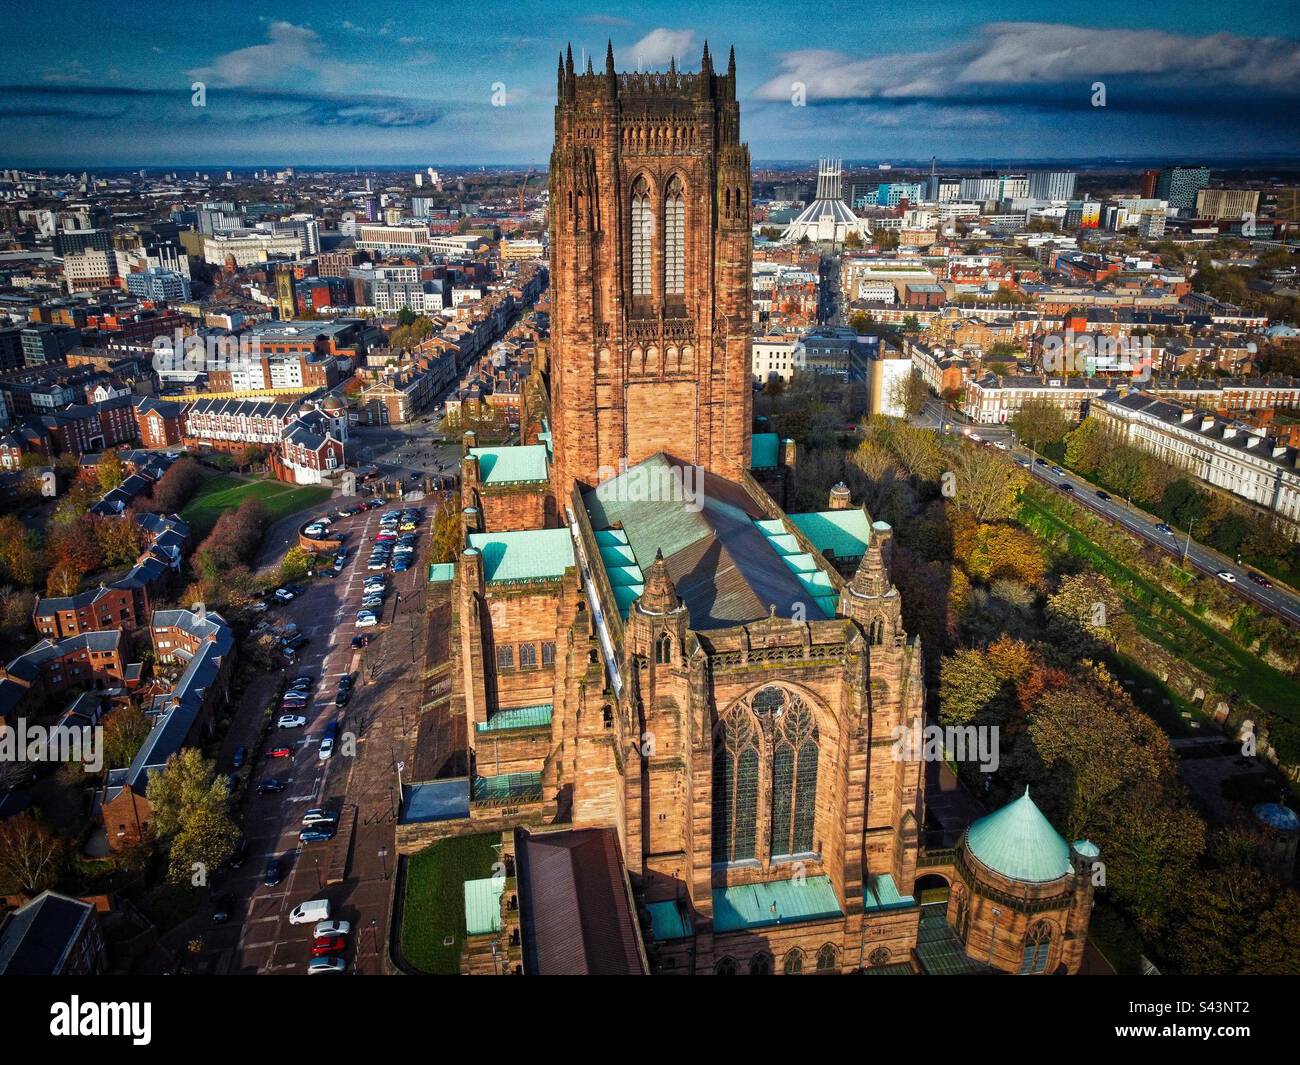 Liverpools Anglican cathedral from the air Stock Photo